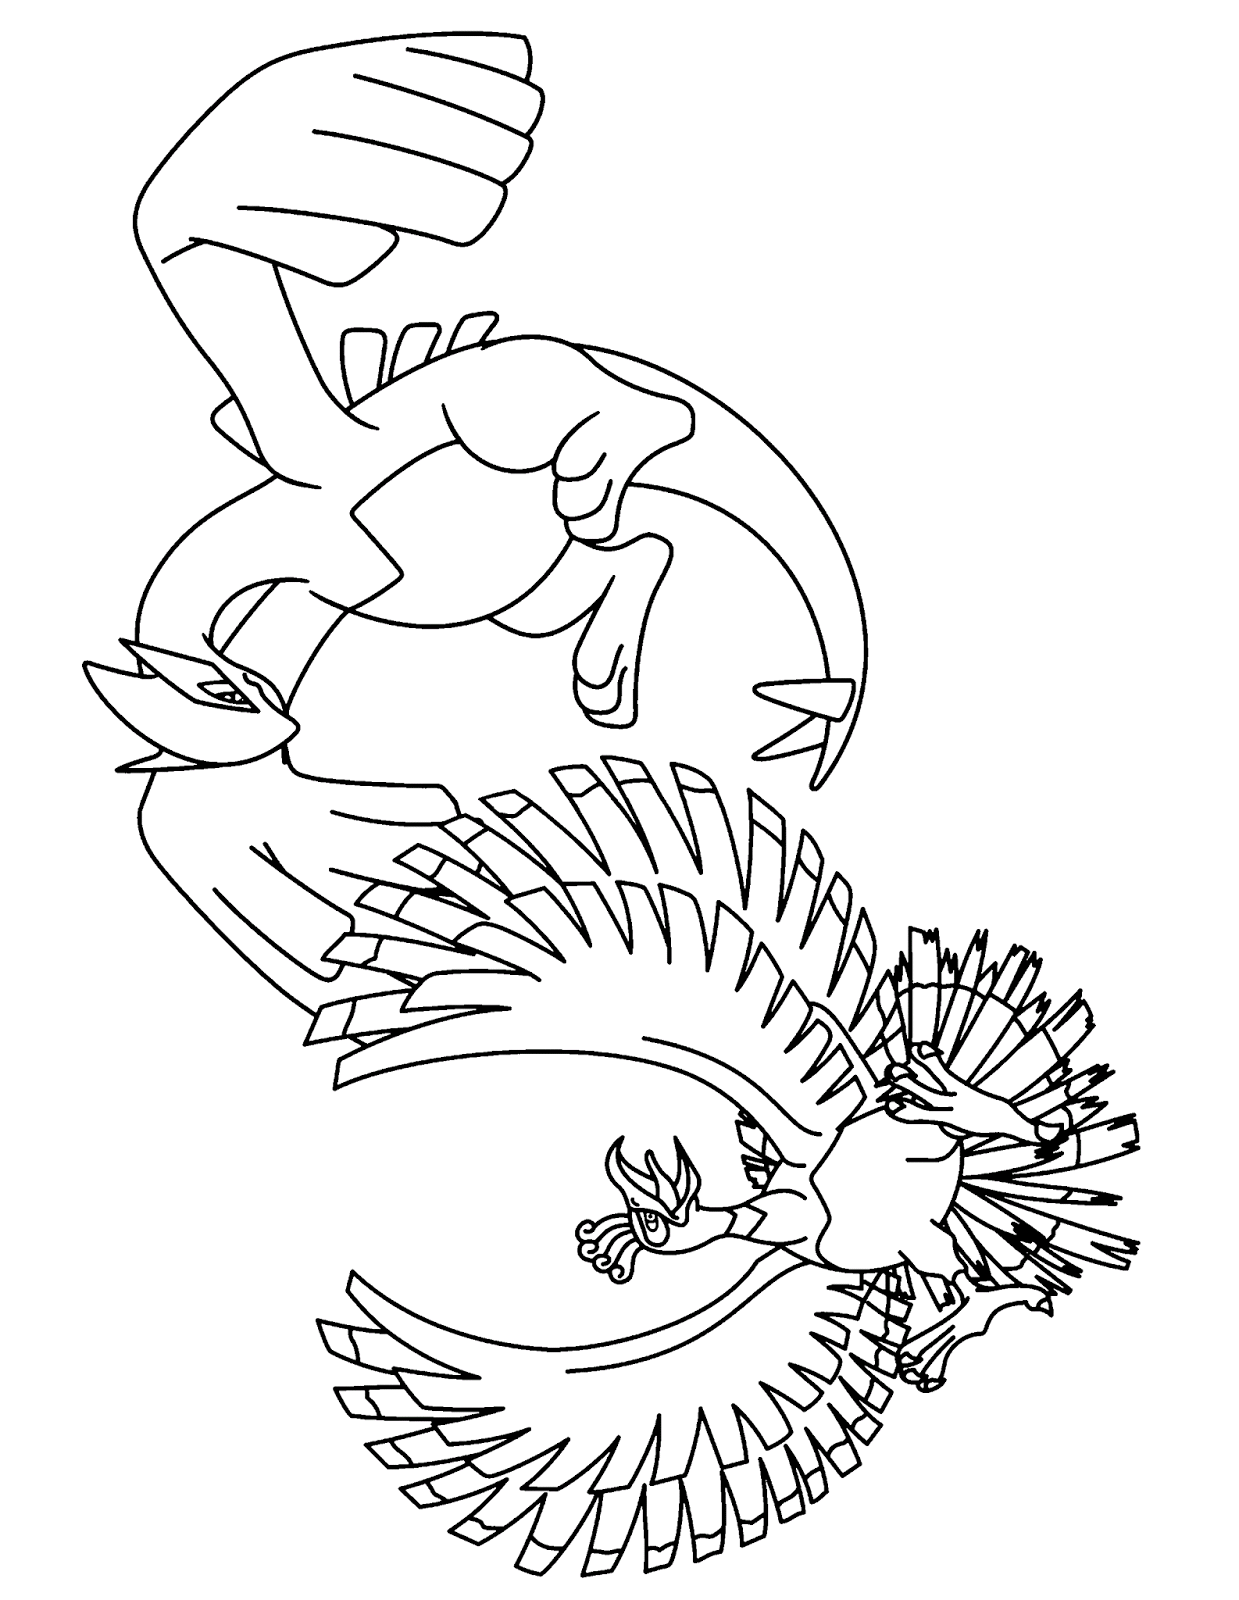 Ho-Oh Coloring Pages.